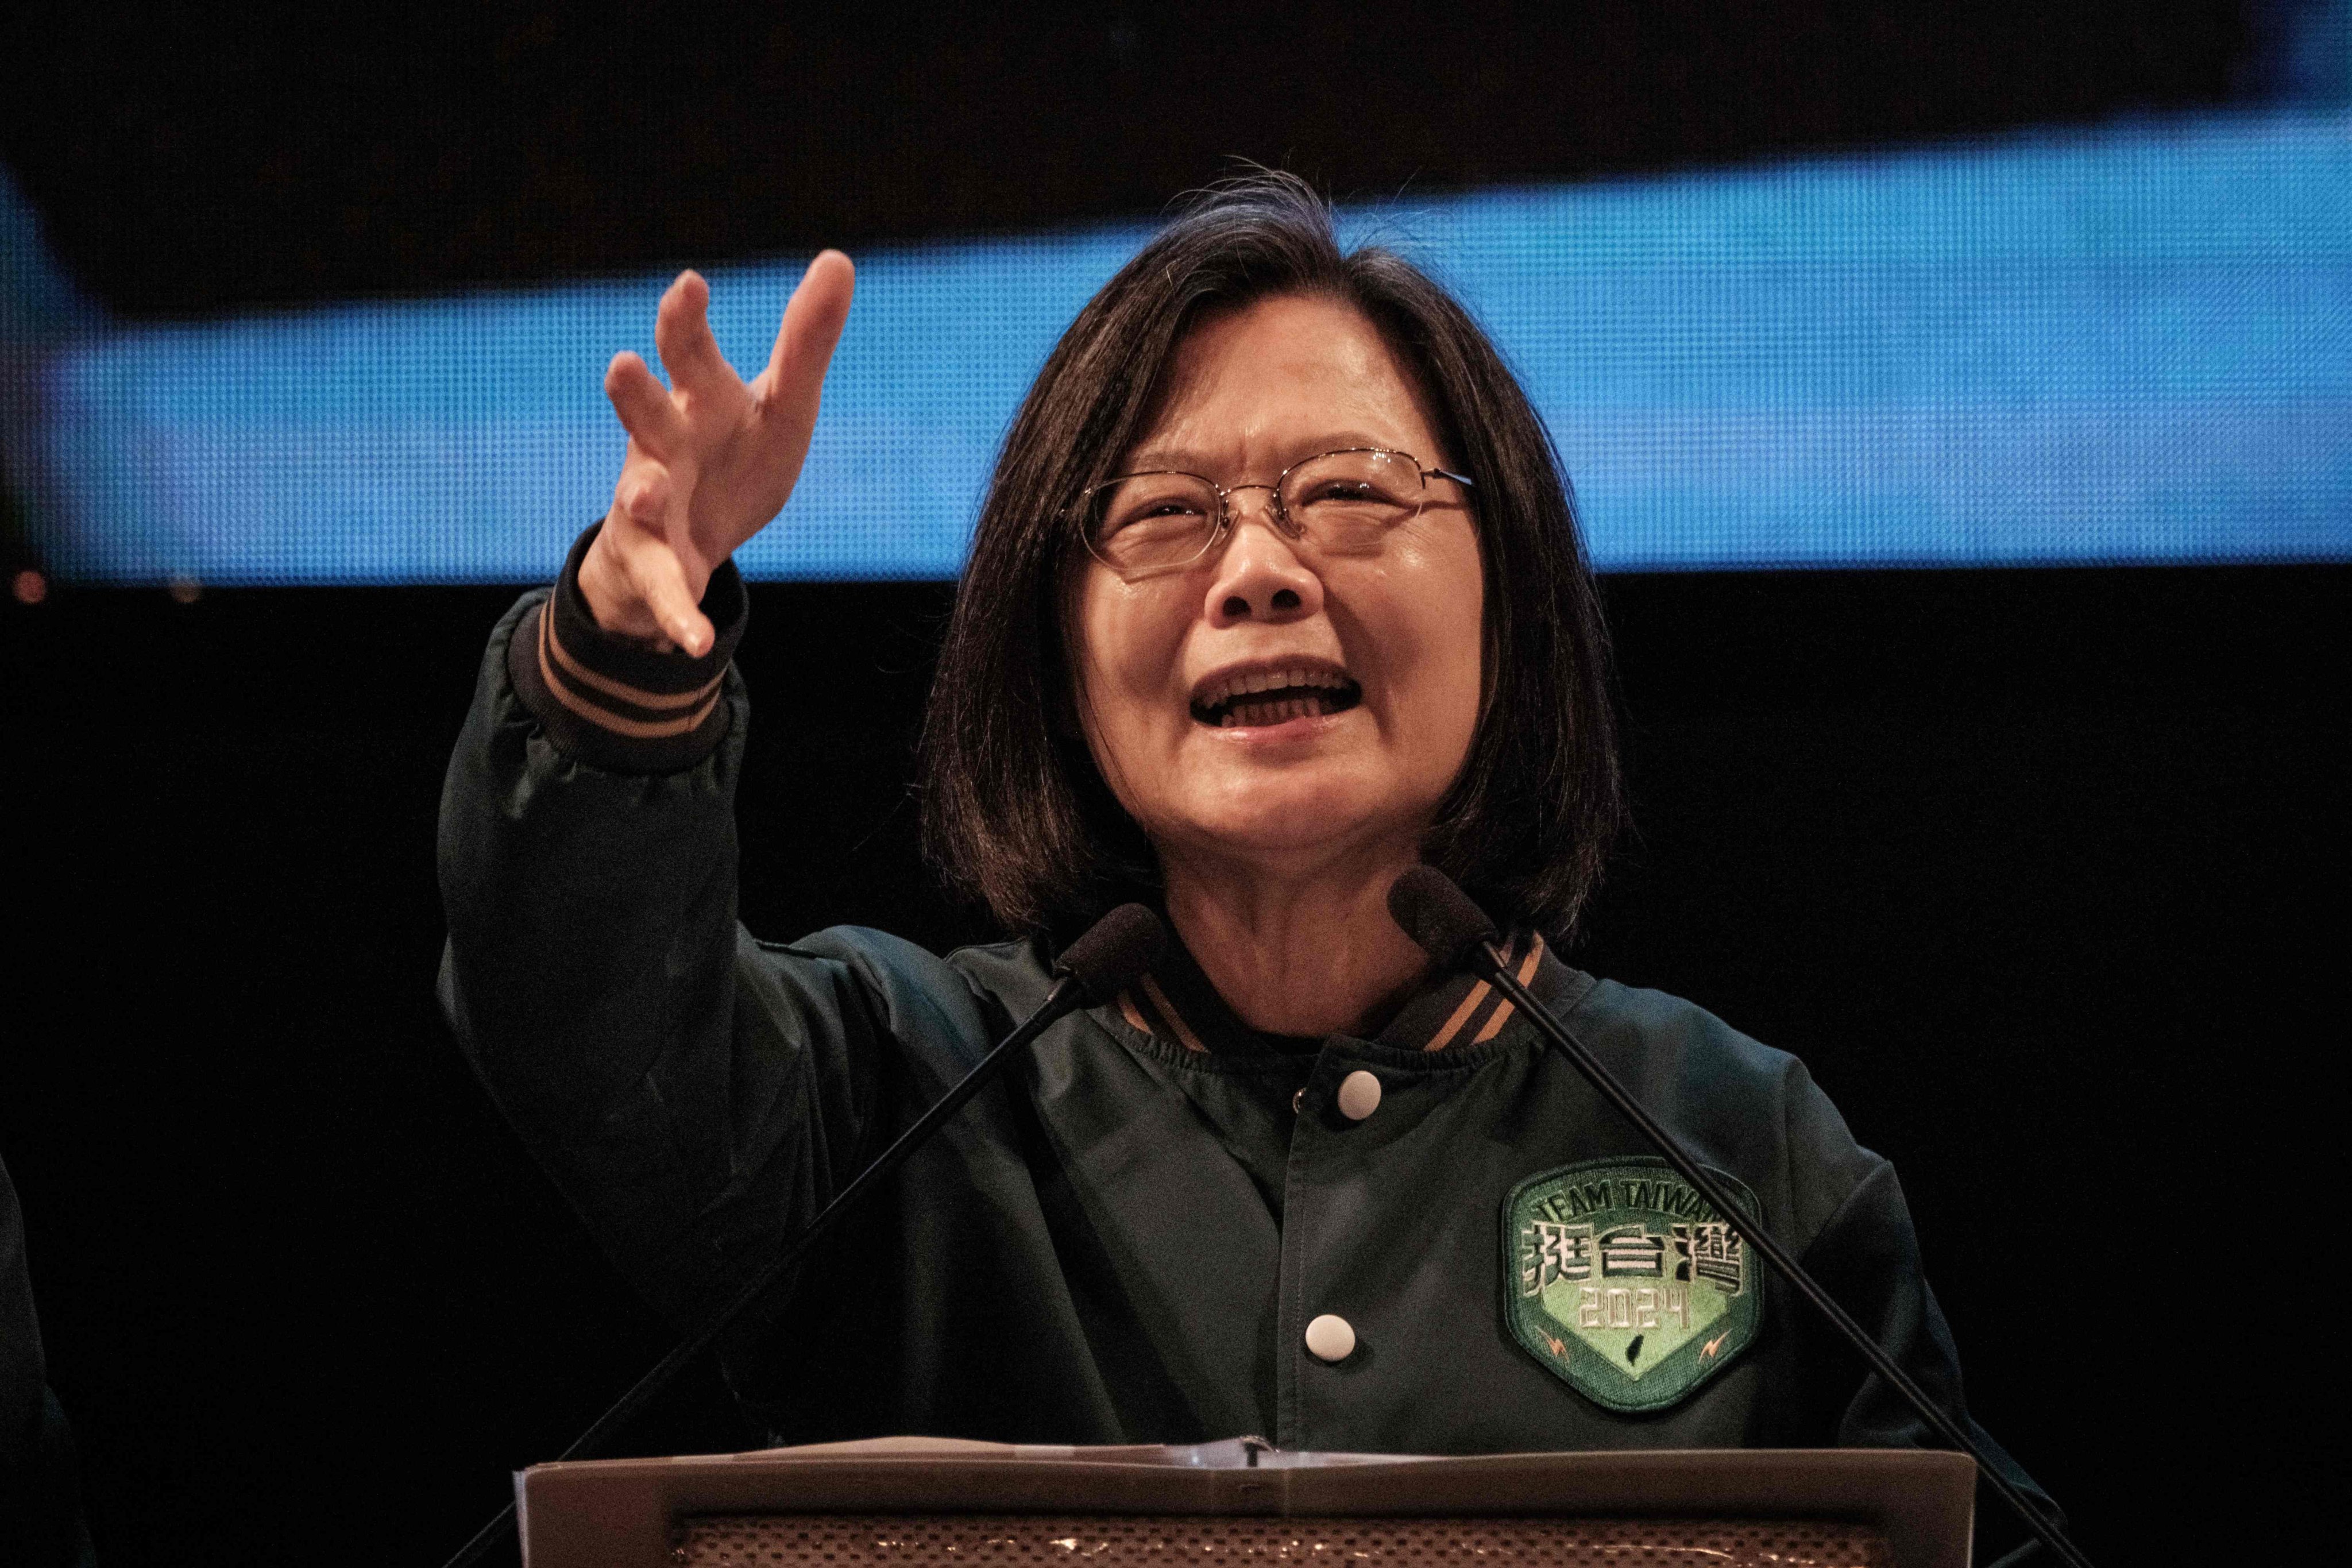 Taiwanese President Tsai Ing-wen has not commented publicly on the recording. Photo: AFP